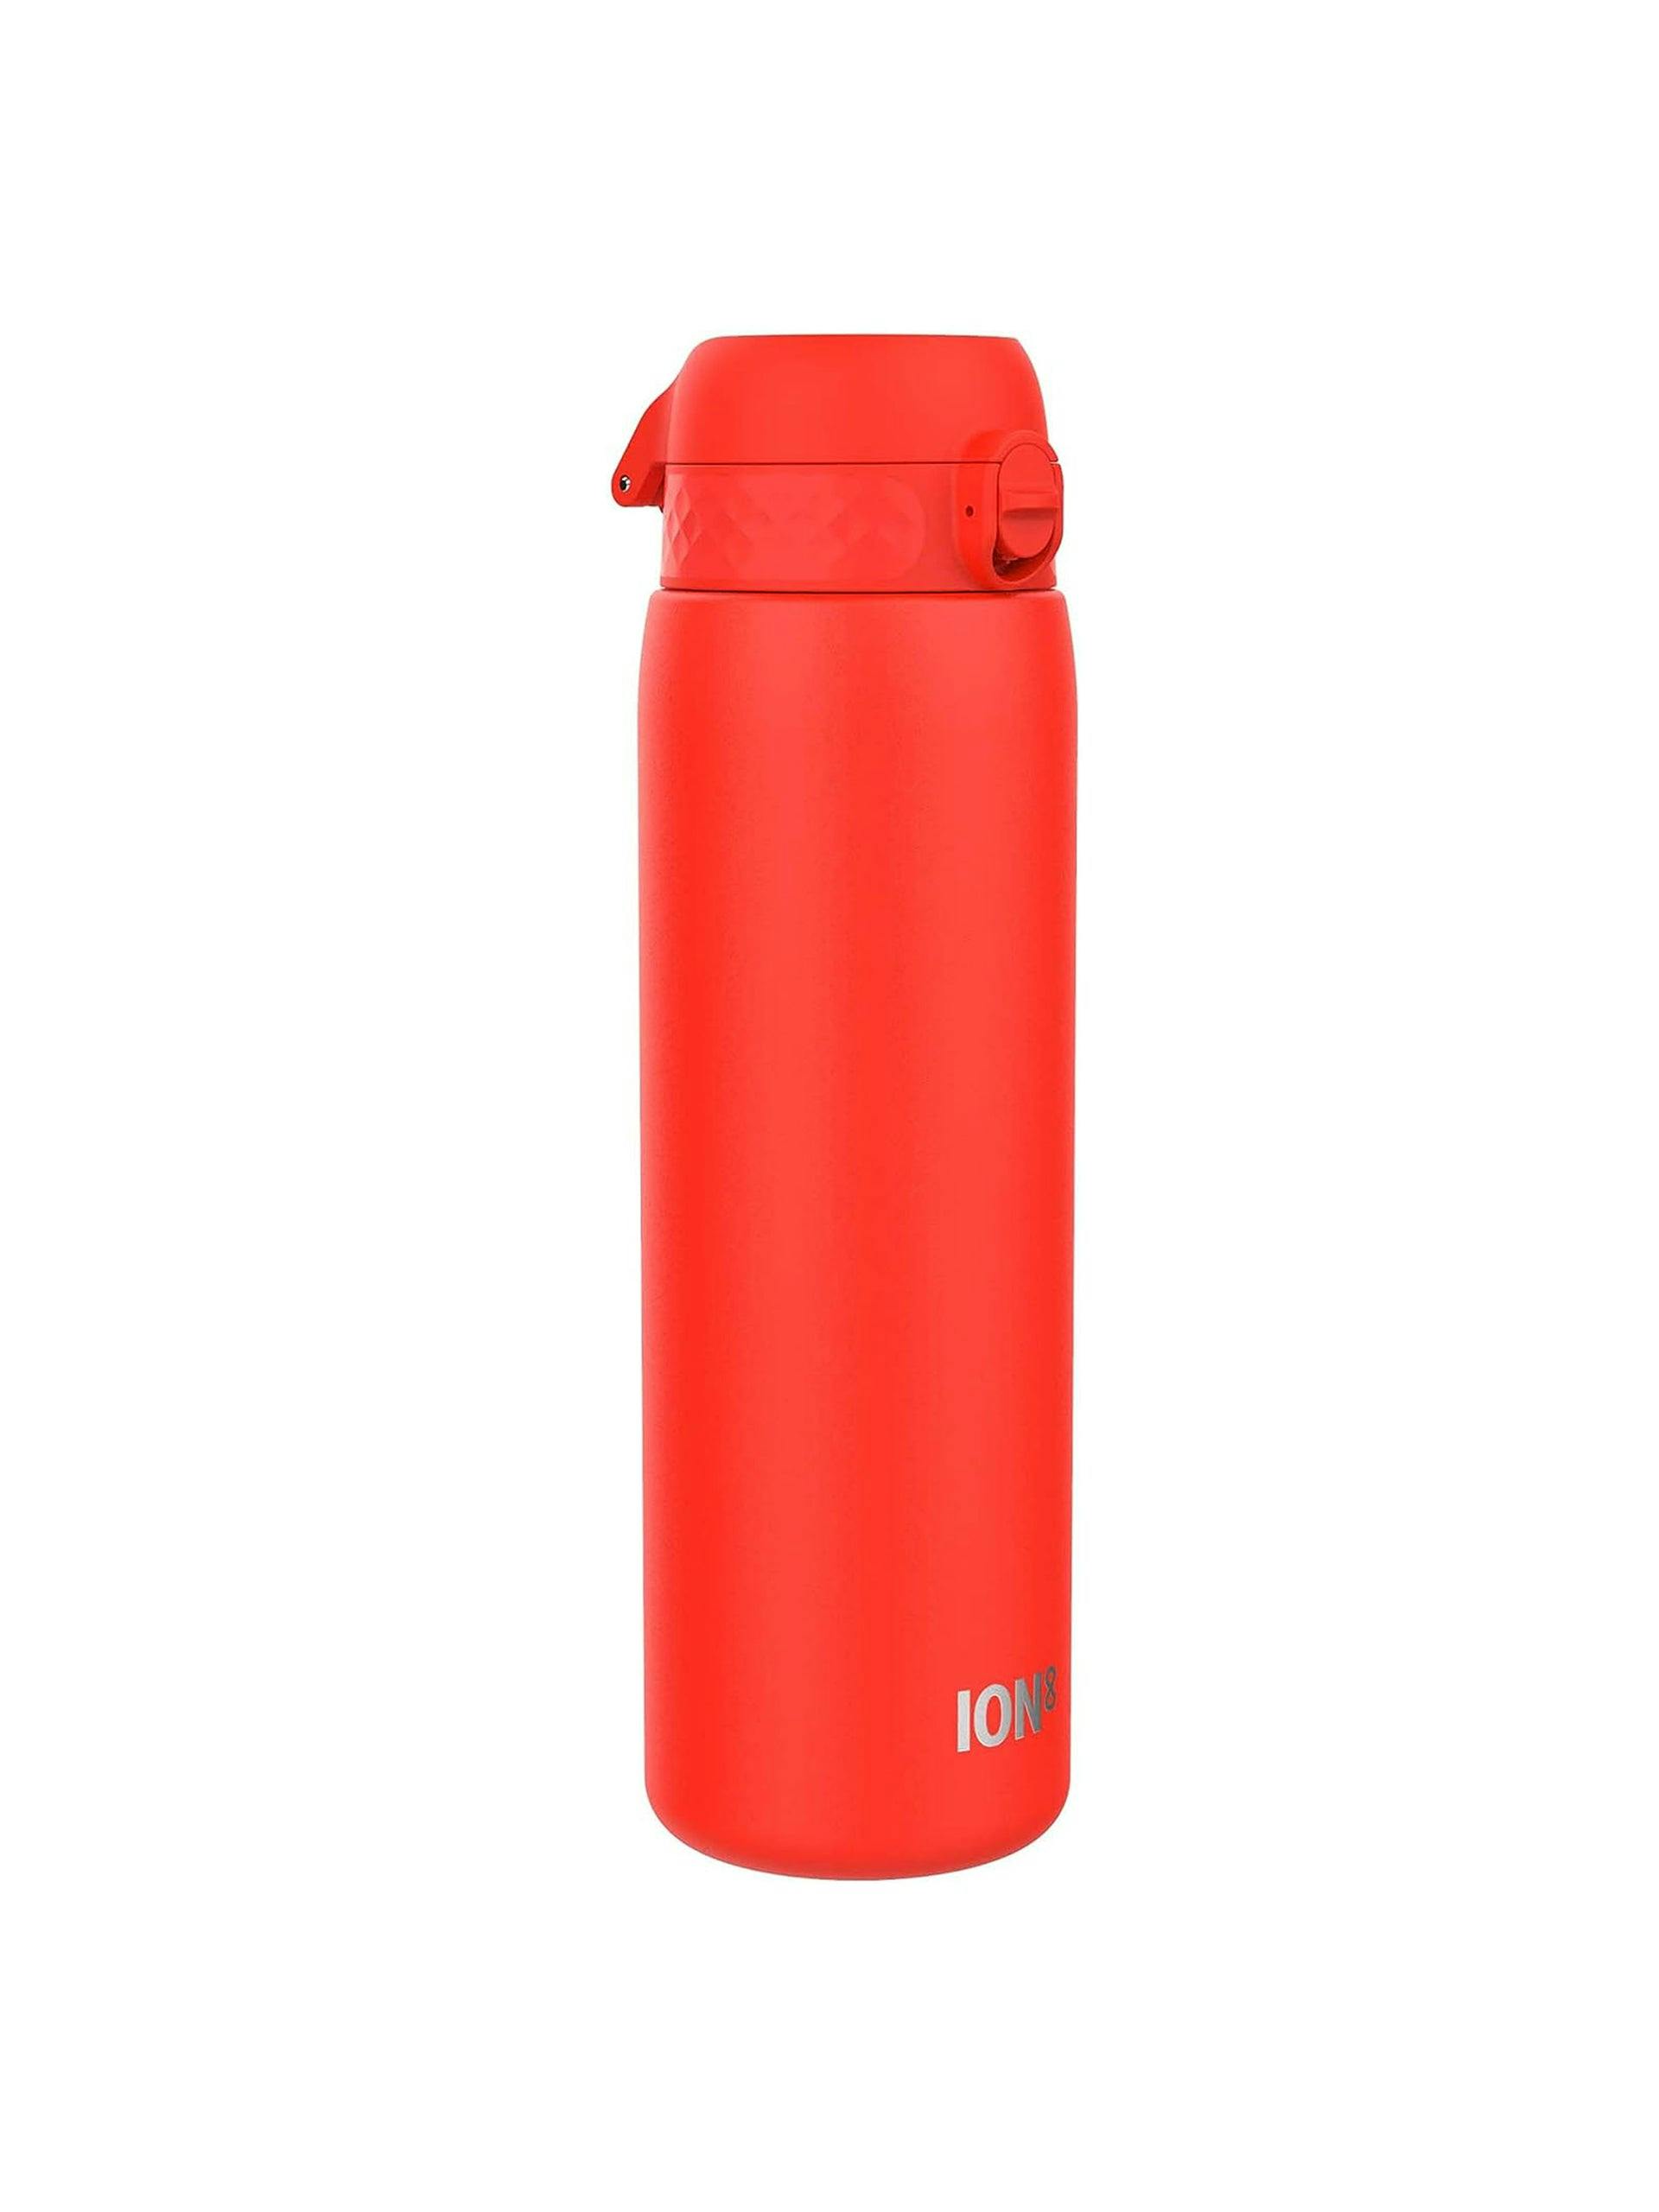 Red stainless steel water bottle